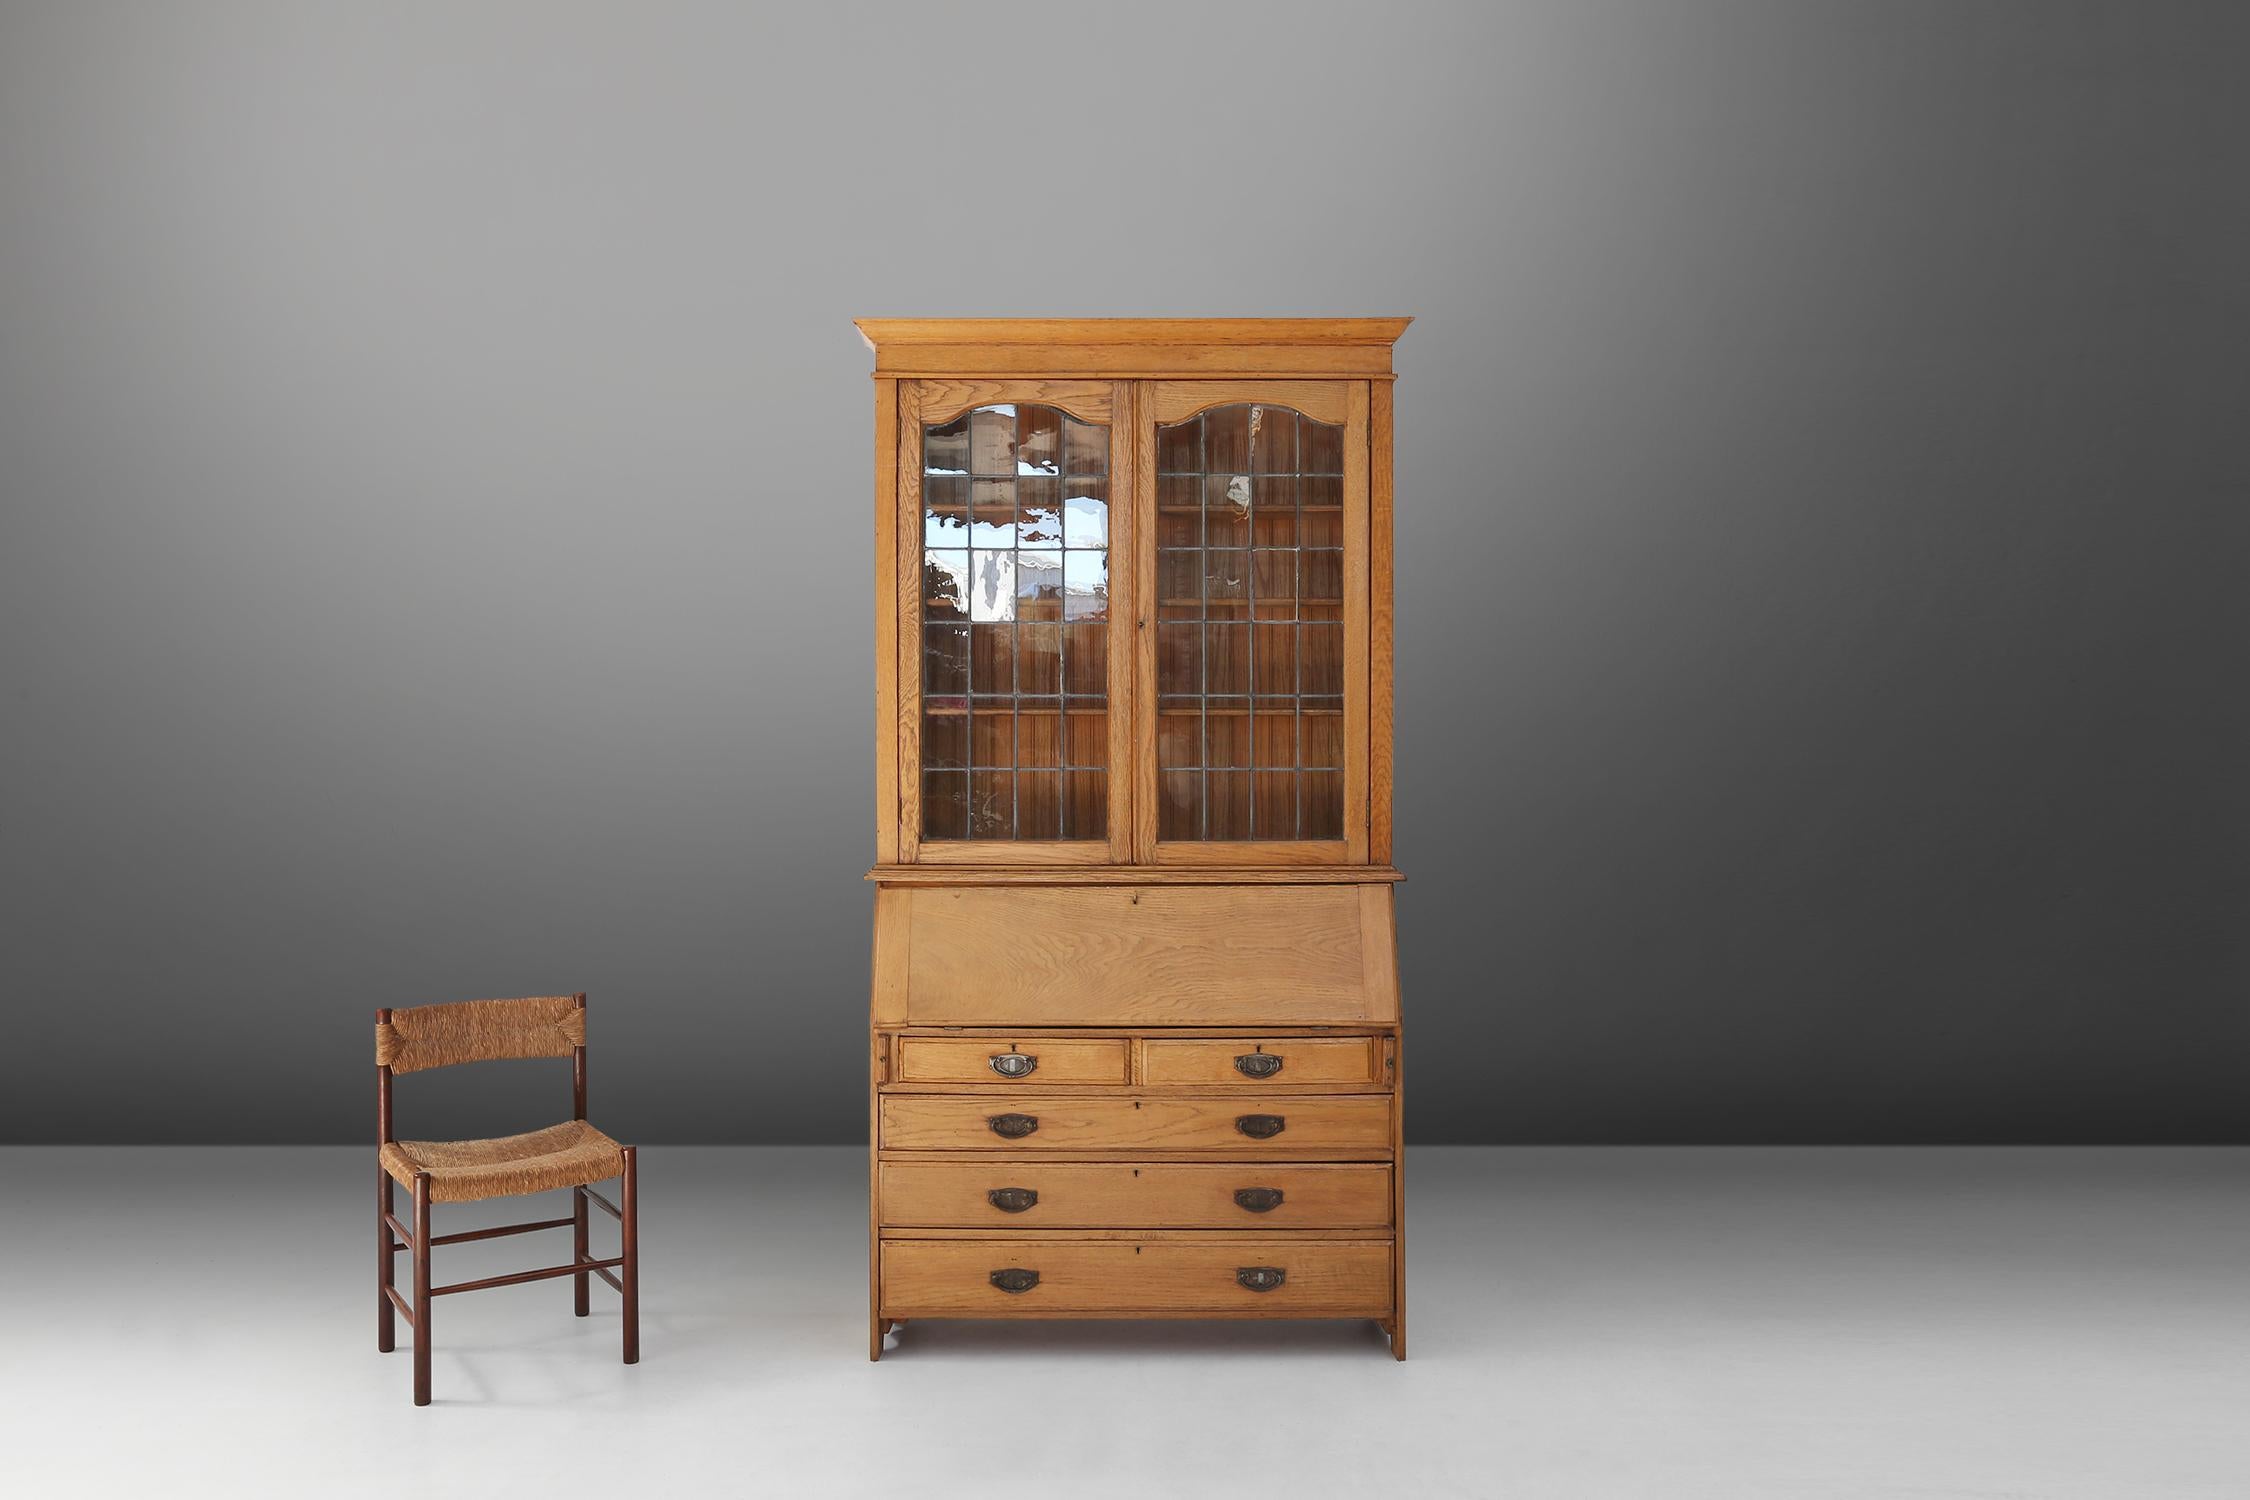 This English secretary bookcase in arts & crafts style is a beautiful piece of furniture that expresses both elegance and functionality. The secretary bookcase was made around 1910 in oak, a durable and warm material that goes well with the